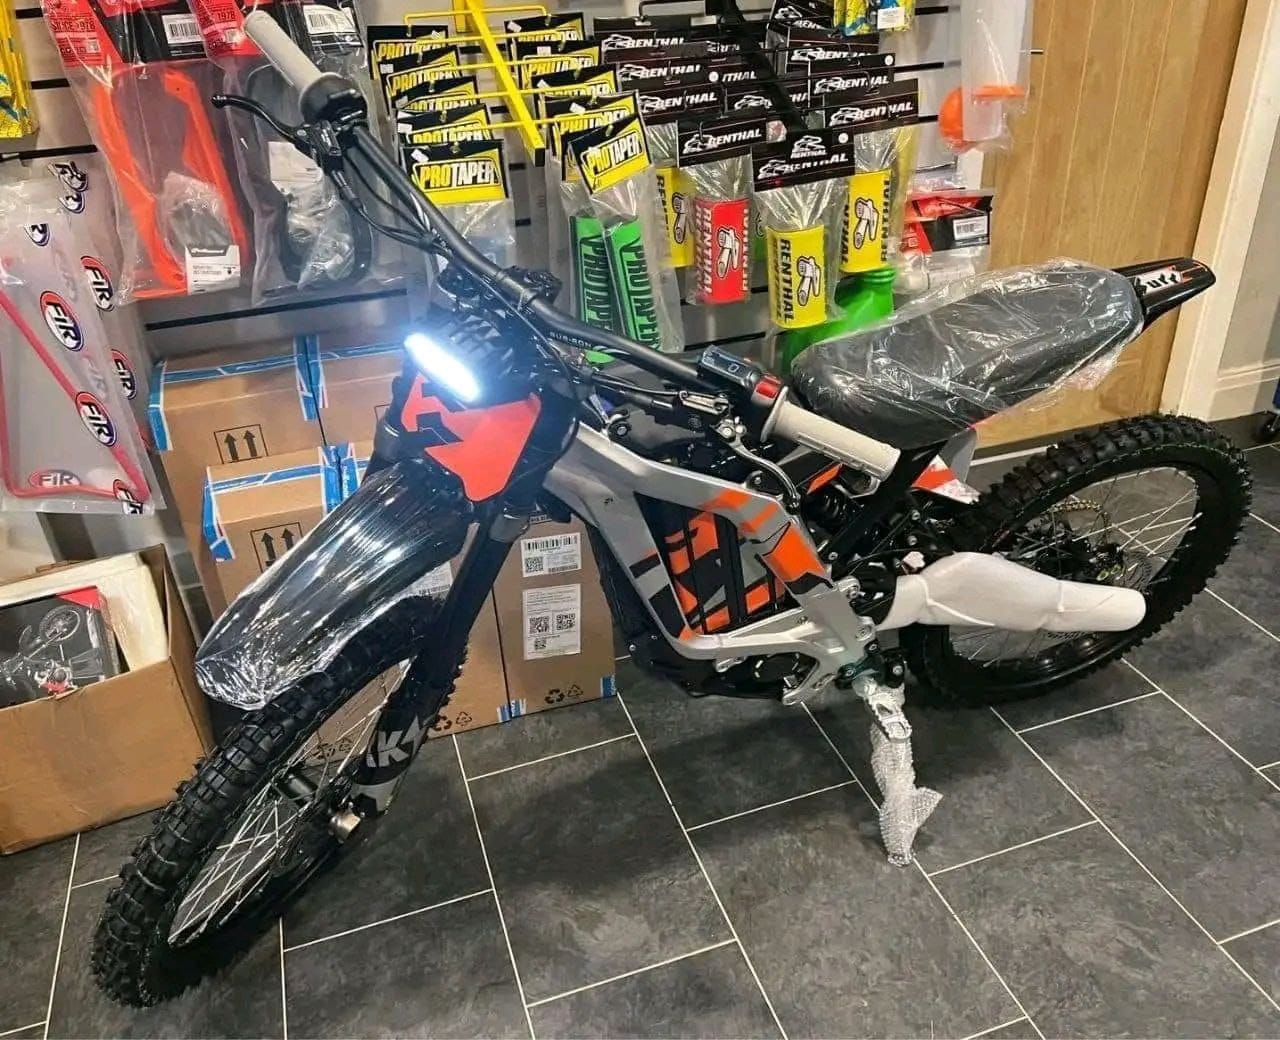  Light Bee X Powerful 5400W Dirt Ebike Adult SurRon Electric Bicycle,delhi,Bikes,Free Classifieds,Post Free Ads,77traders.com